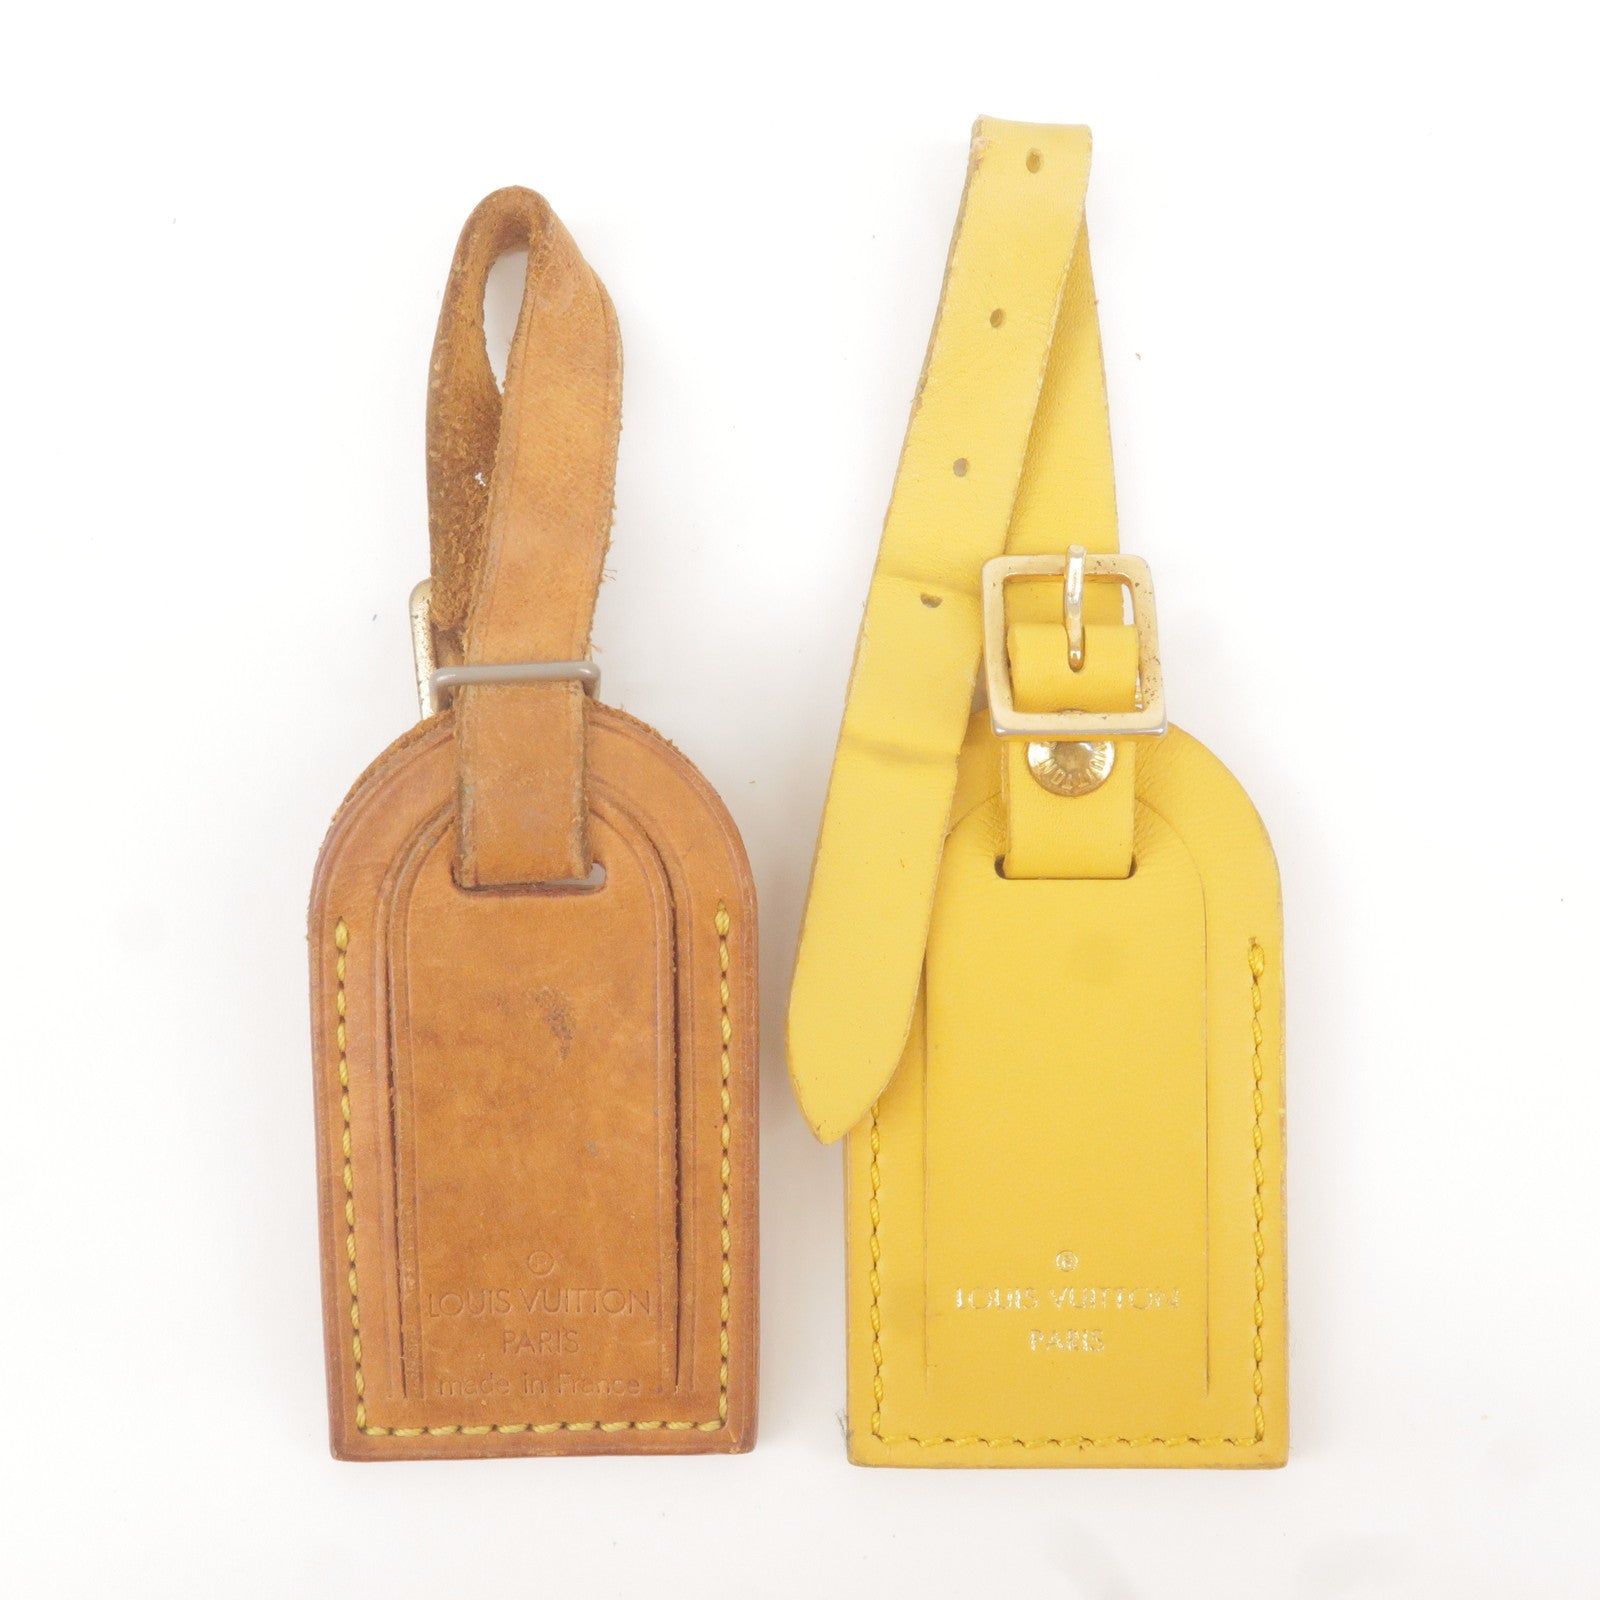 of - Name - Set - Beige - ep_vintage luxury Store - Yellow – dct - 20 -  Brown - Louis - Leather - Vuitton - Tag - Louis Vuitton Schal Floral Navy  Baumwolle Seide